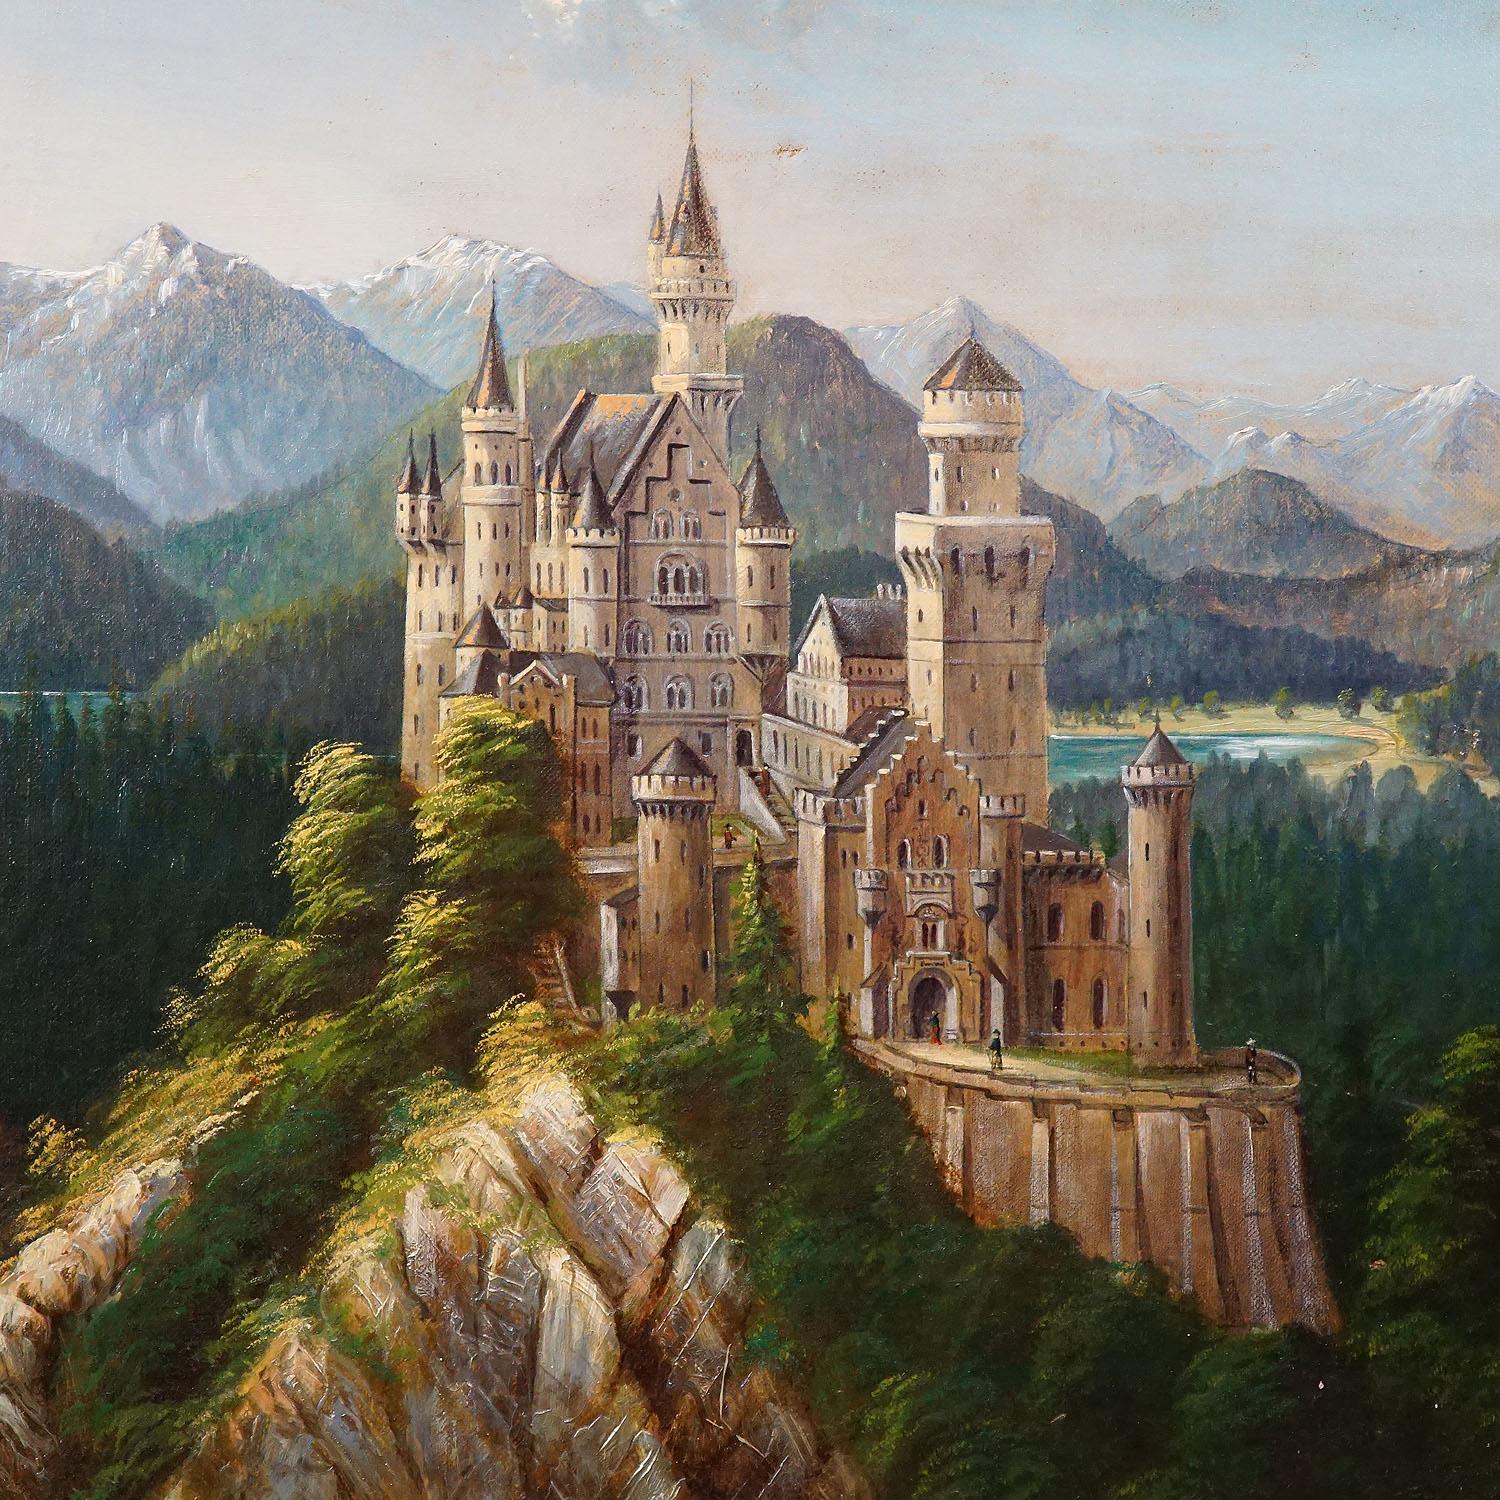 A great oil painting depicting castle neuschwanstein. Oil on canvas by A. Pfisterer 1896. Framed with antique richly decorated and gilded frame. Signed on the lower right. Frame with some defects.

Measures: Width 36.02